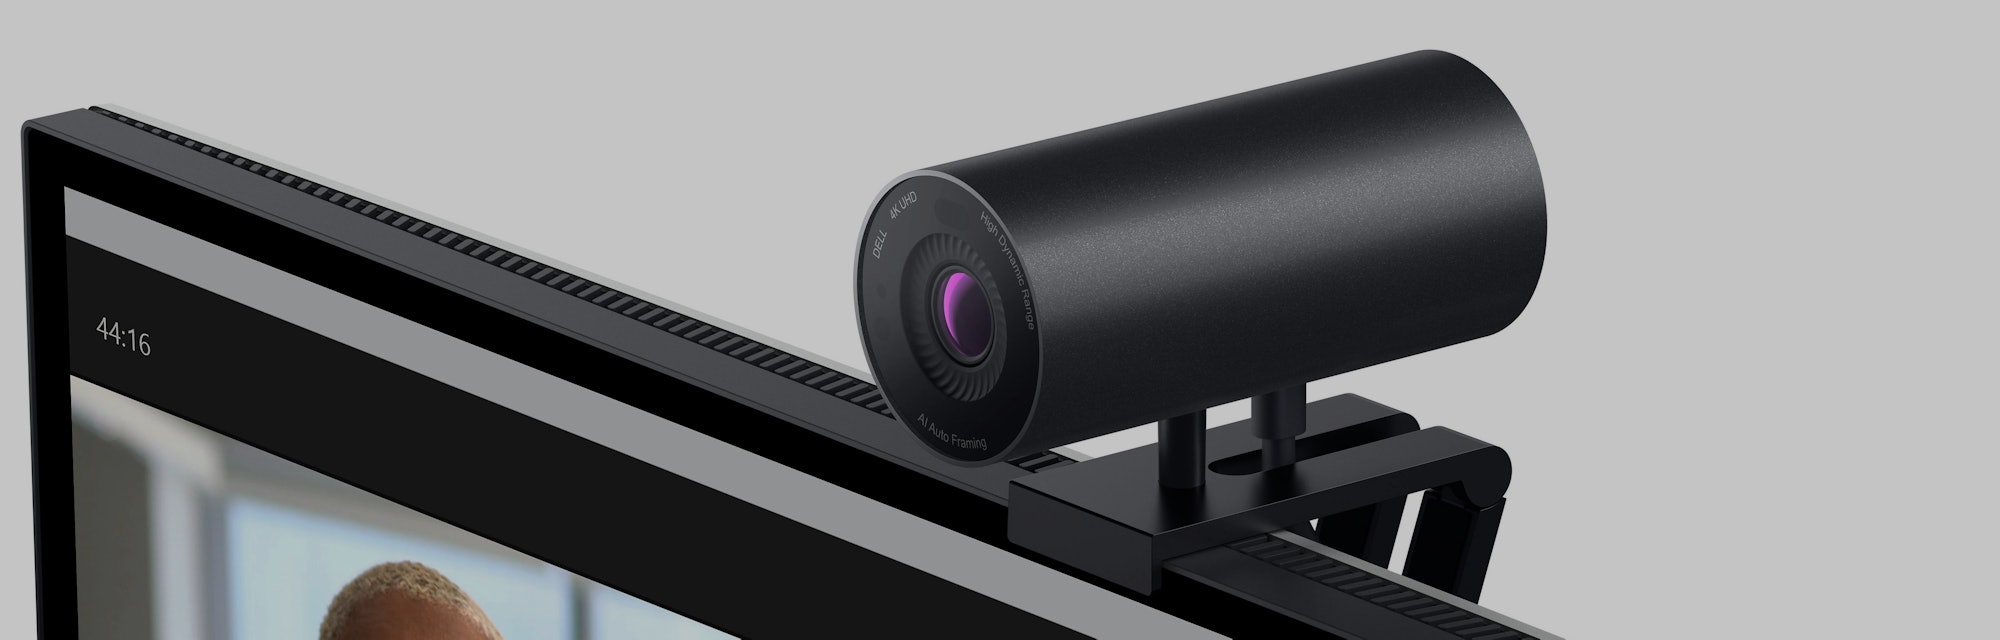 Dell 4K UltraSharp webcam costs $200. Doesn't come with a built-in microphone.